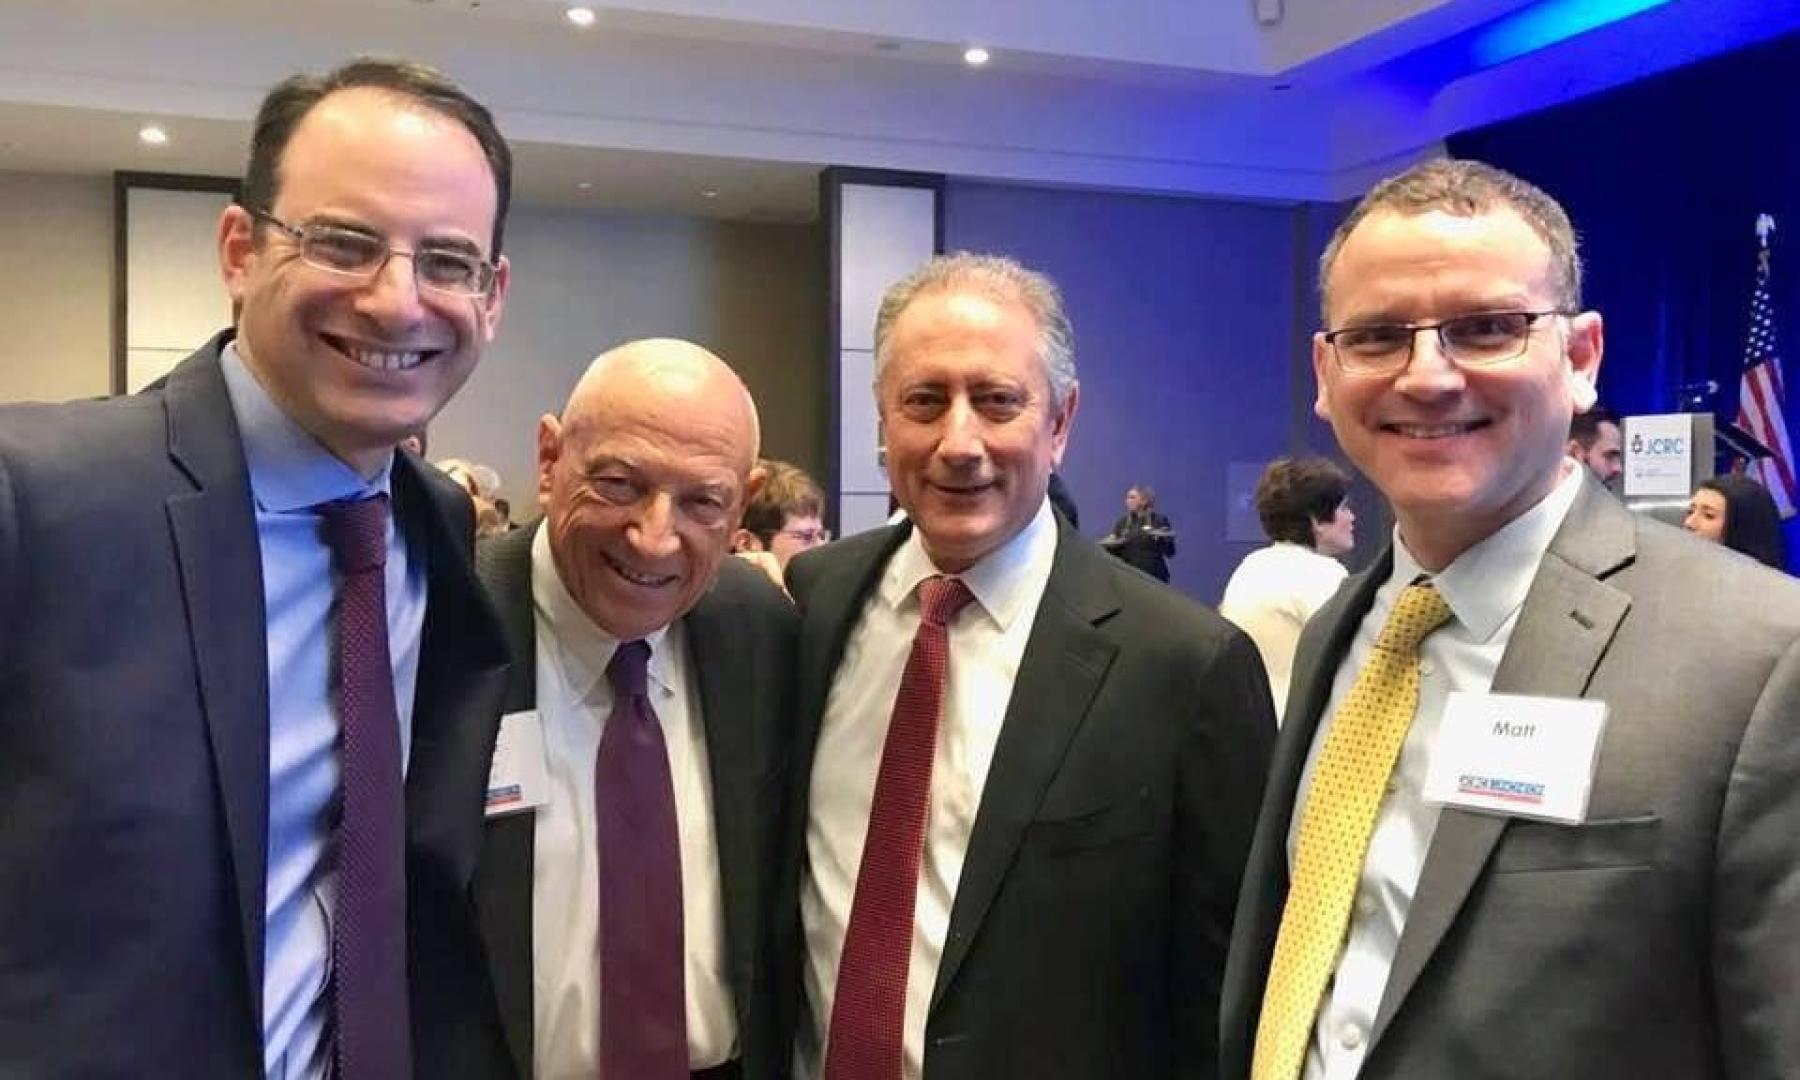 Attorney General Phil Weiser, former state Sen. Rollie Heath, honoree Noel Ginsburg and prosecutor Matt Maillaro at this year's Jewish Community Relations Council lunch. (Photo by Lynn Bartels)